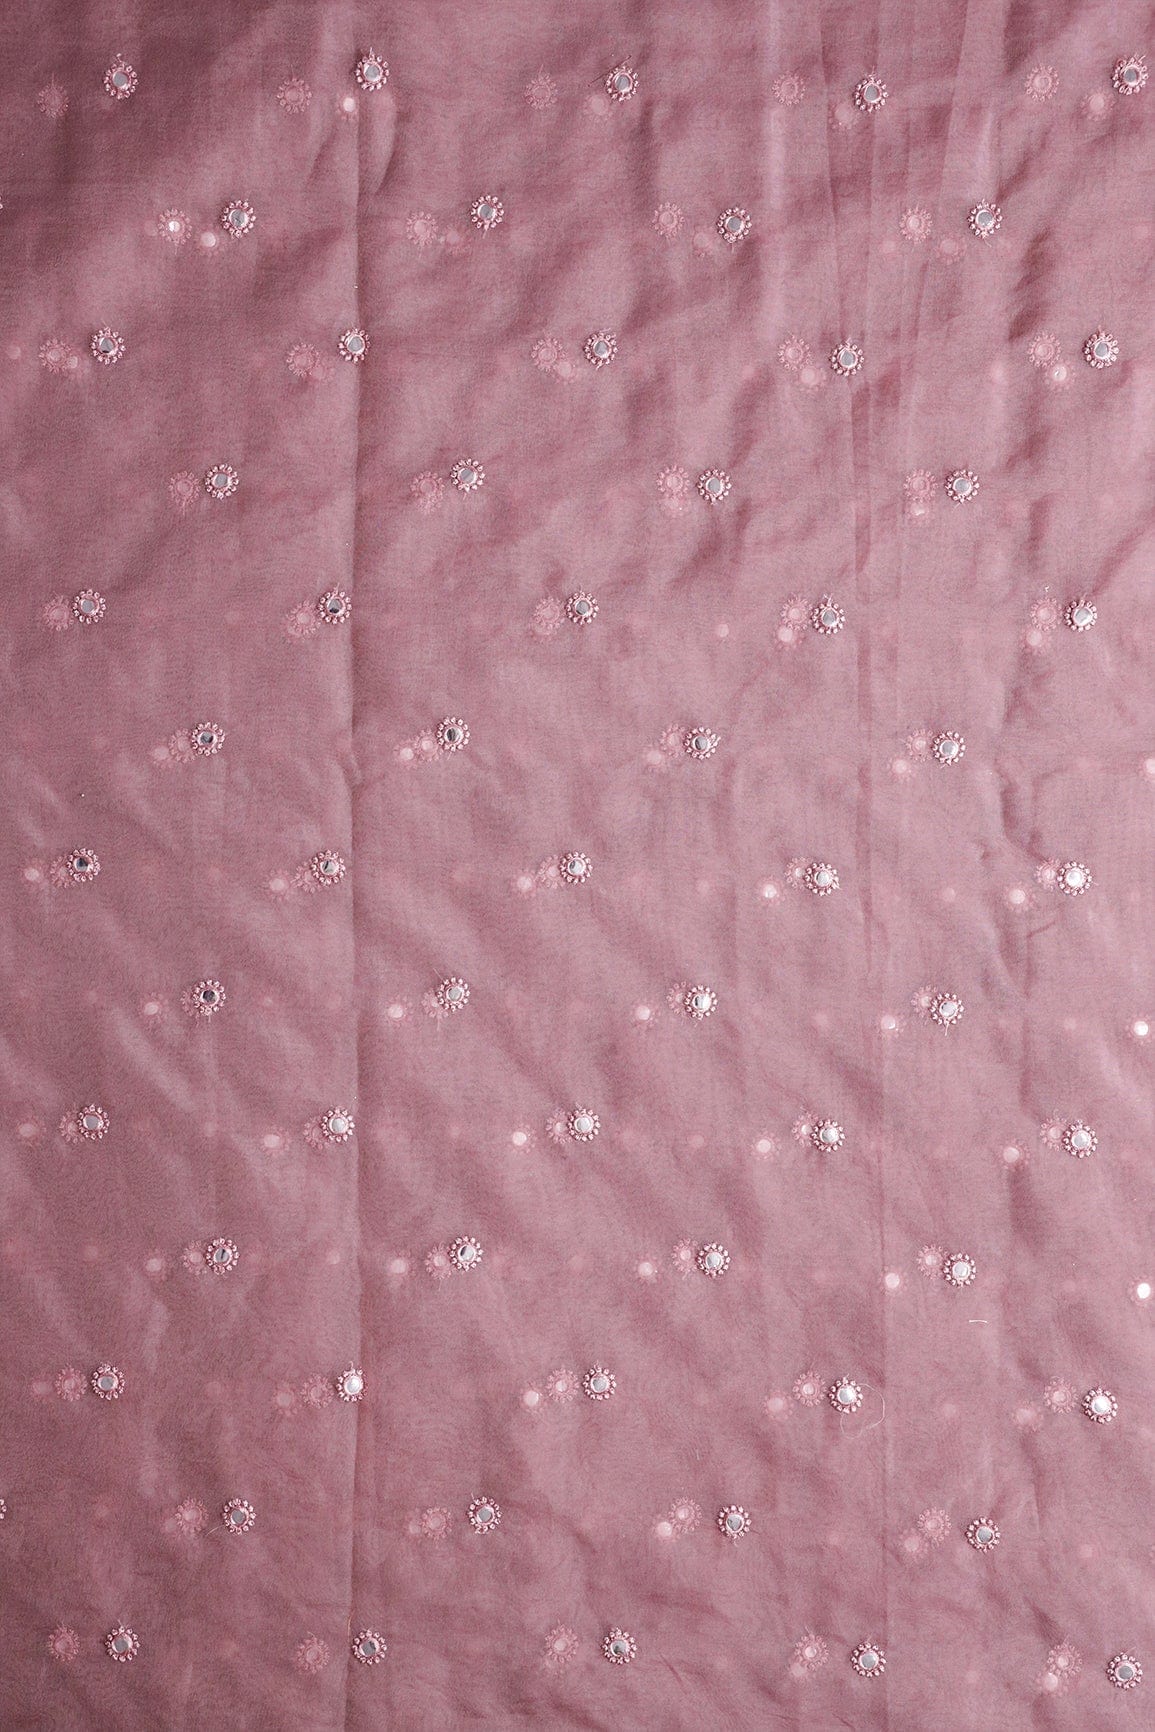 doeraa Embroidery Fabrics Mauve Thread With Foil Mirror Work Small Motif Embroidery On Mauve Organza Fabric